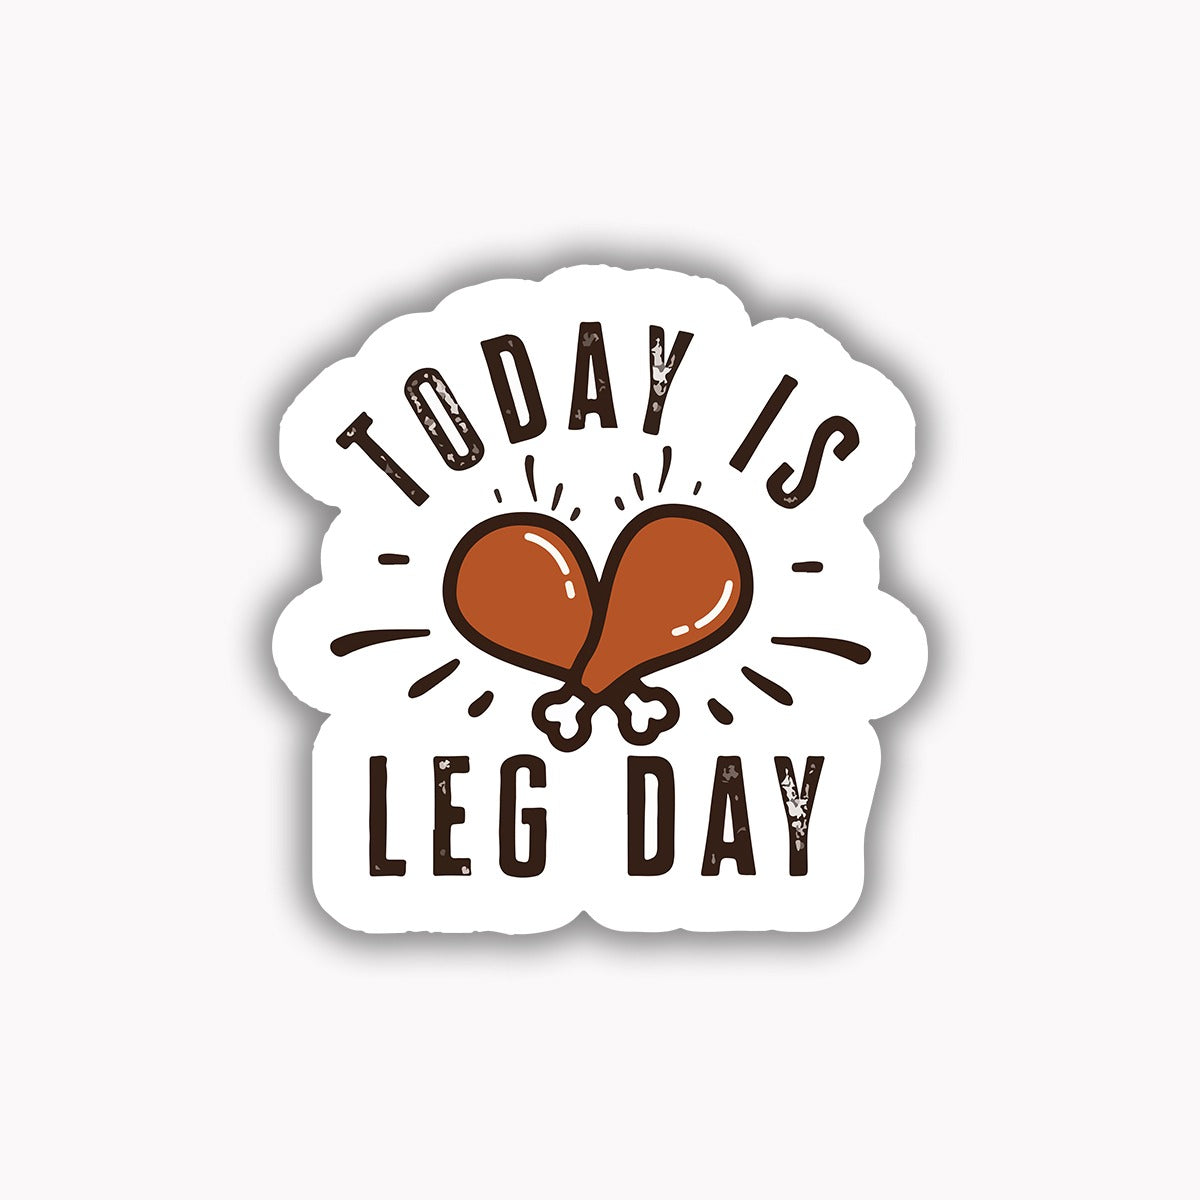 Today is leg day